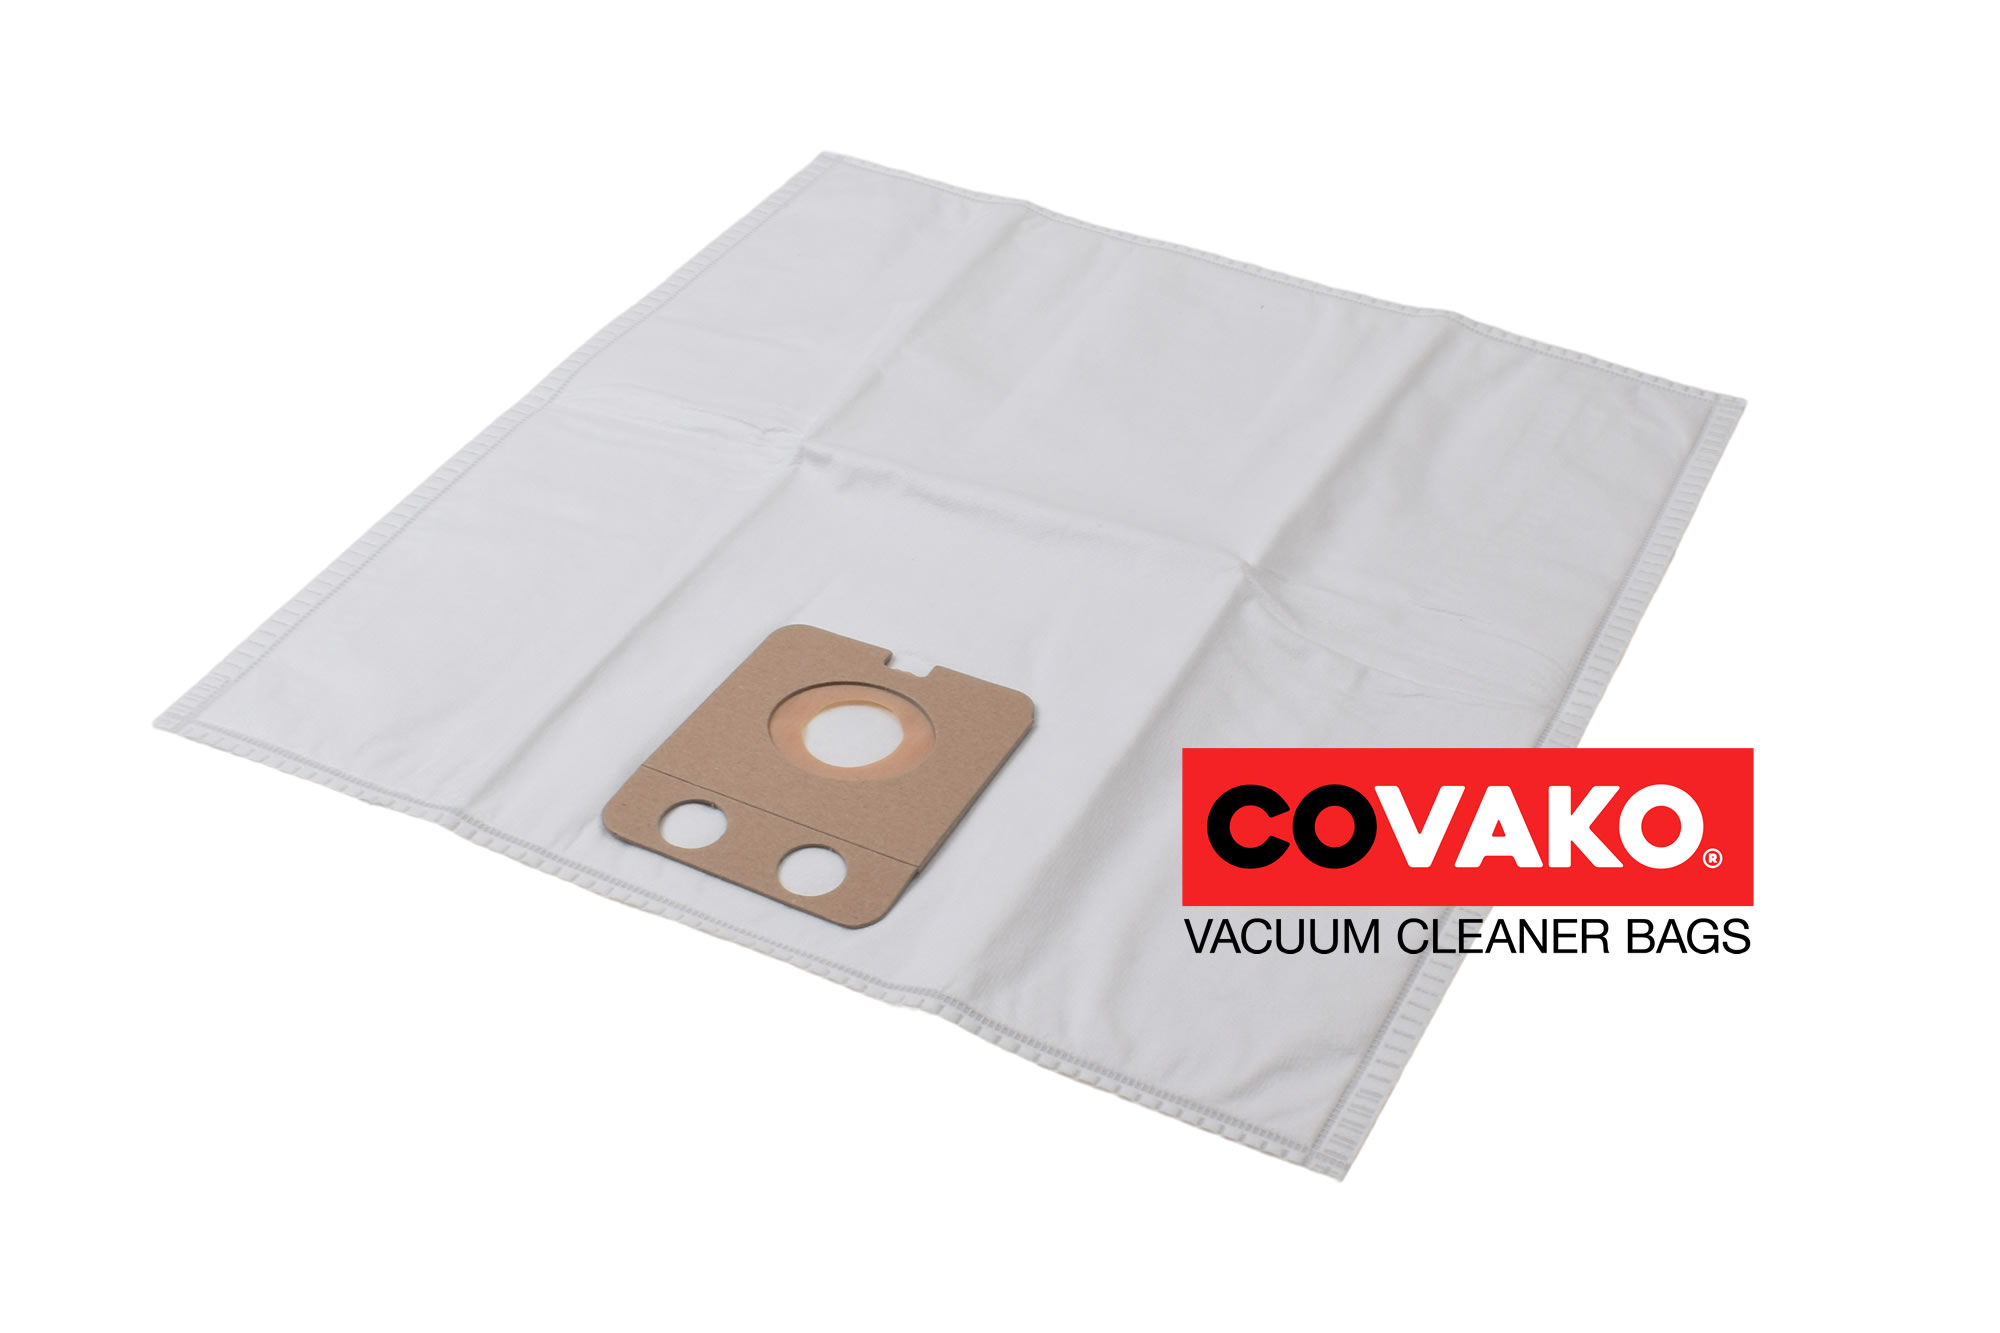 Alto VP 300 / Synthesis - Alto vacuum cleaner bags